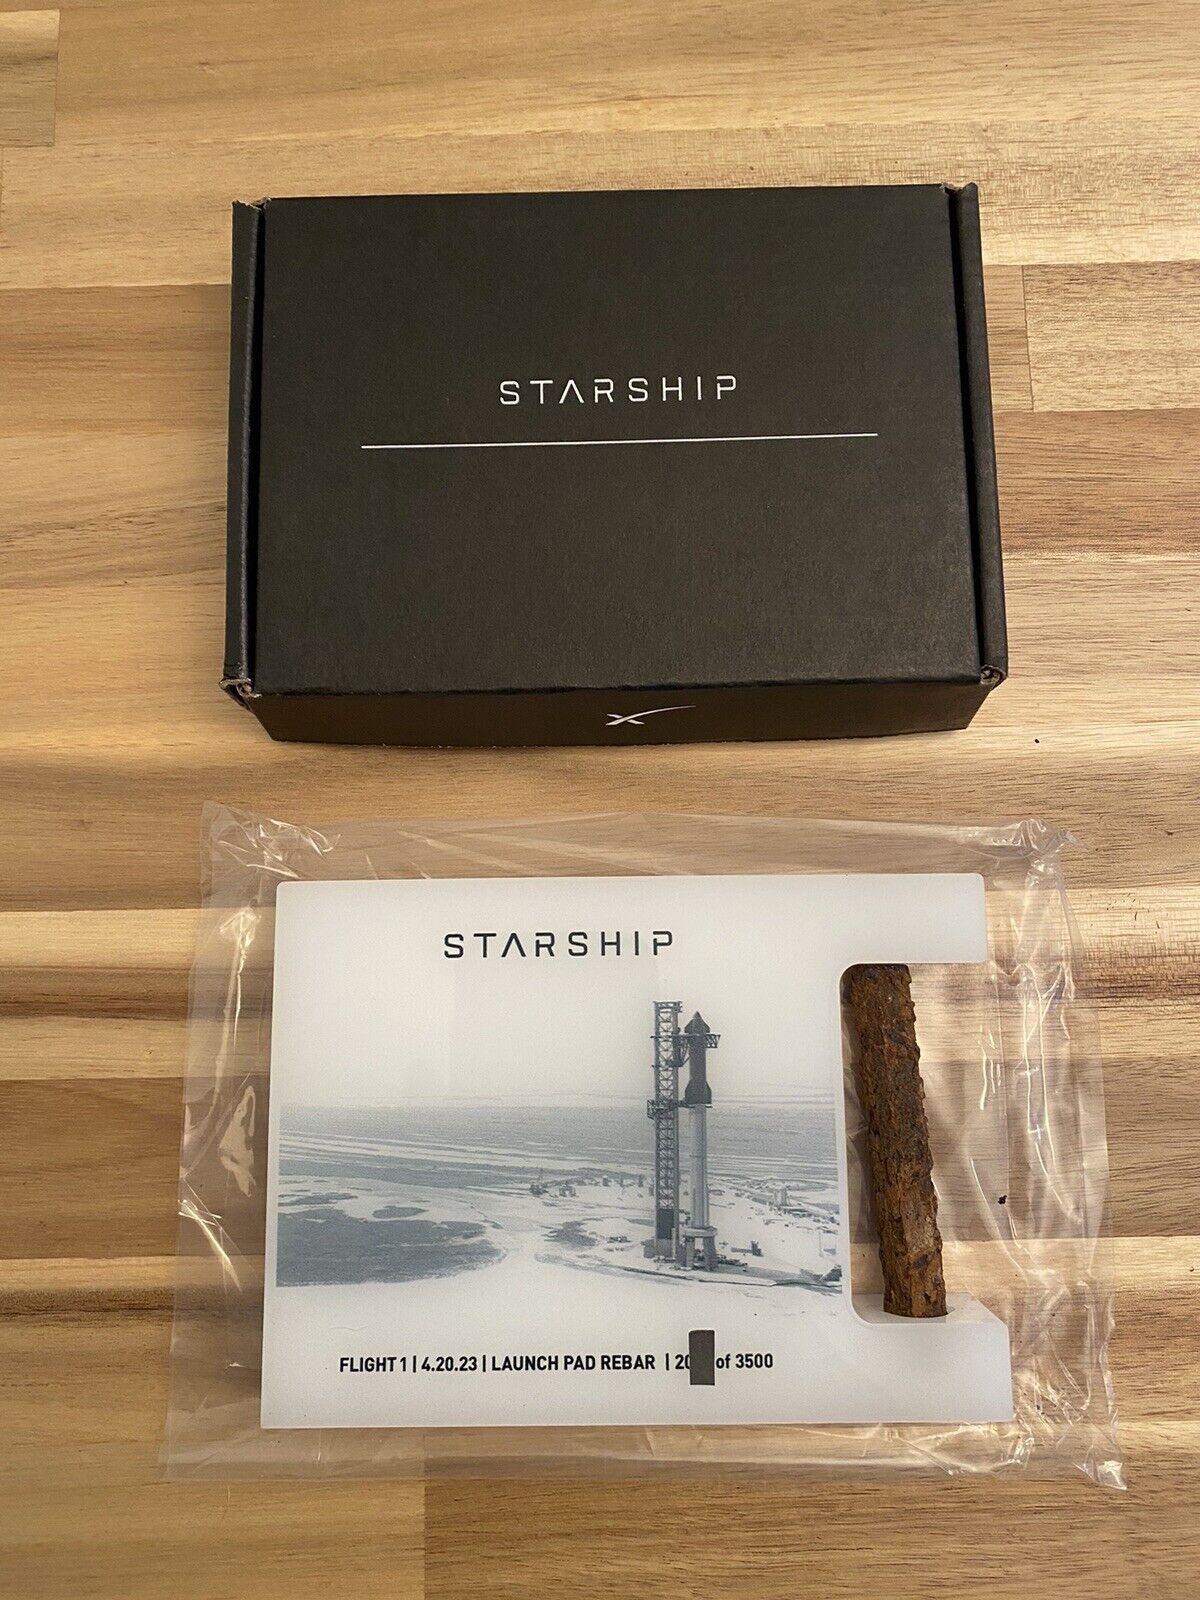 SpaceX Starship IFT-1 Employee Commemorative Plaque With Rebar (3500 Made)